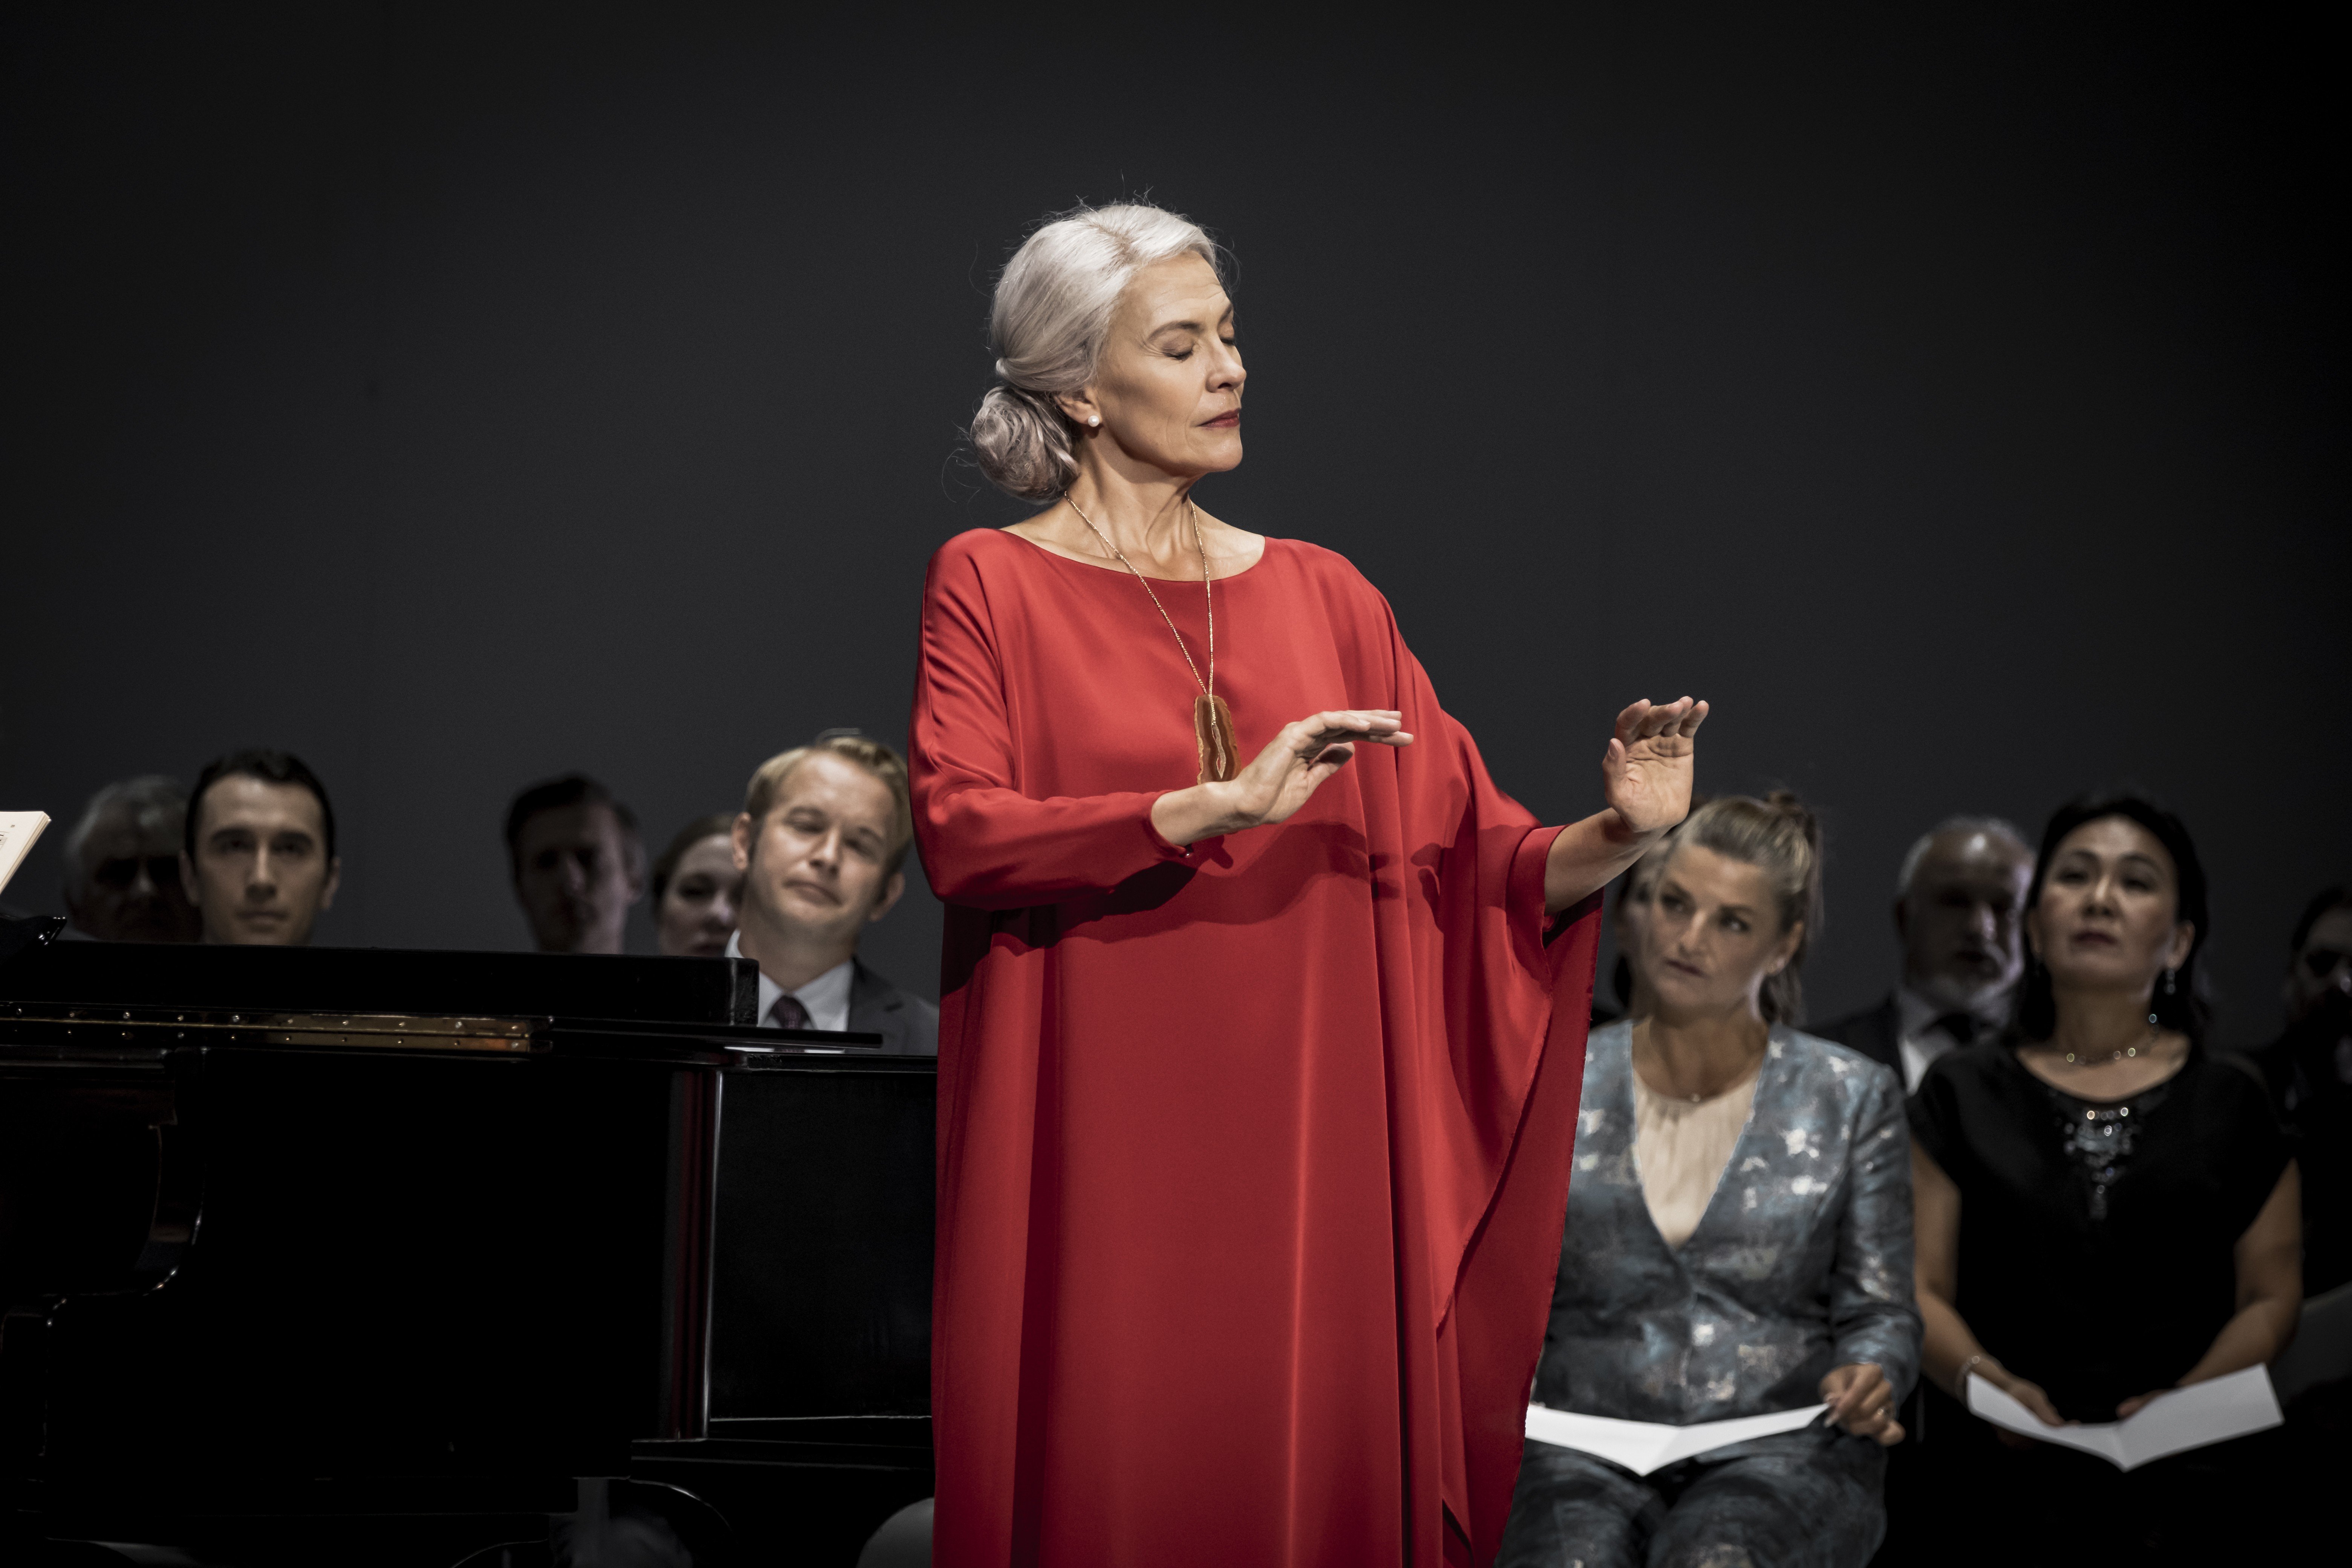 Adapted from Ingmar Bergman’s classic 1978 film, Autumn Sonata is a two-act work commissioned by the Finnish National Opera and will be staged in Hong Kong by Sweden’s Malmö Opera. Photo: Jonas Persson